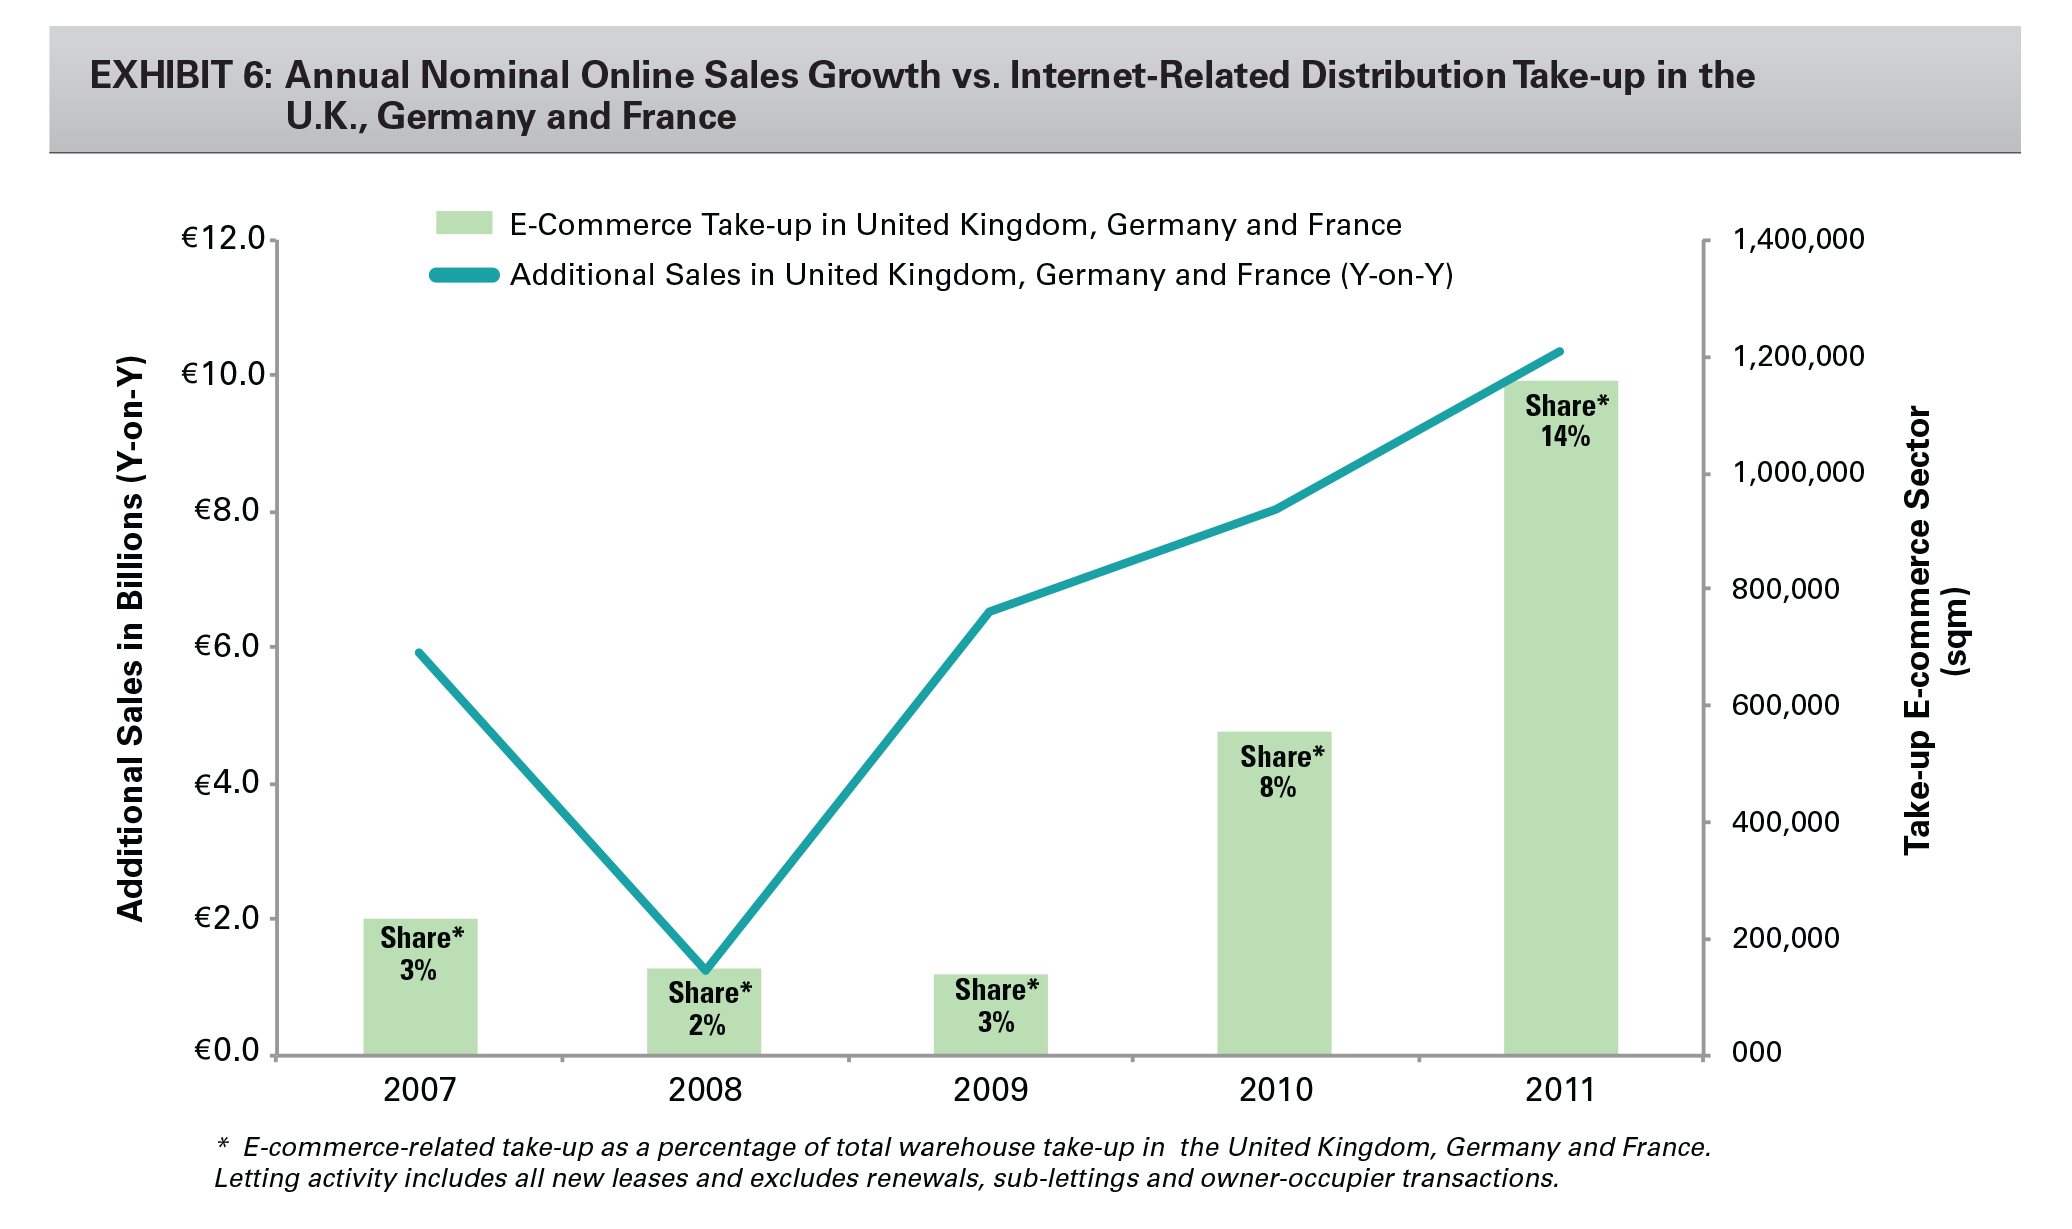 Exhibit 6: Annual Nominal Online Sales Growth vs. Internet-Related Distribution Take-up in the U.K., Germany and France